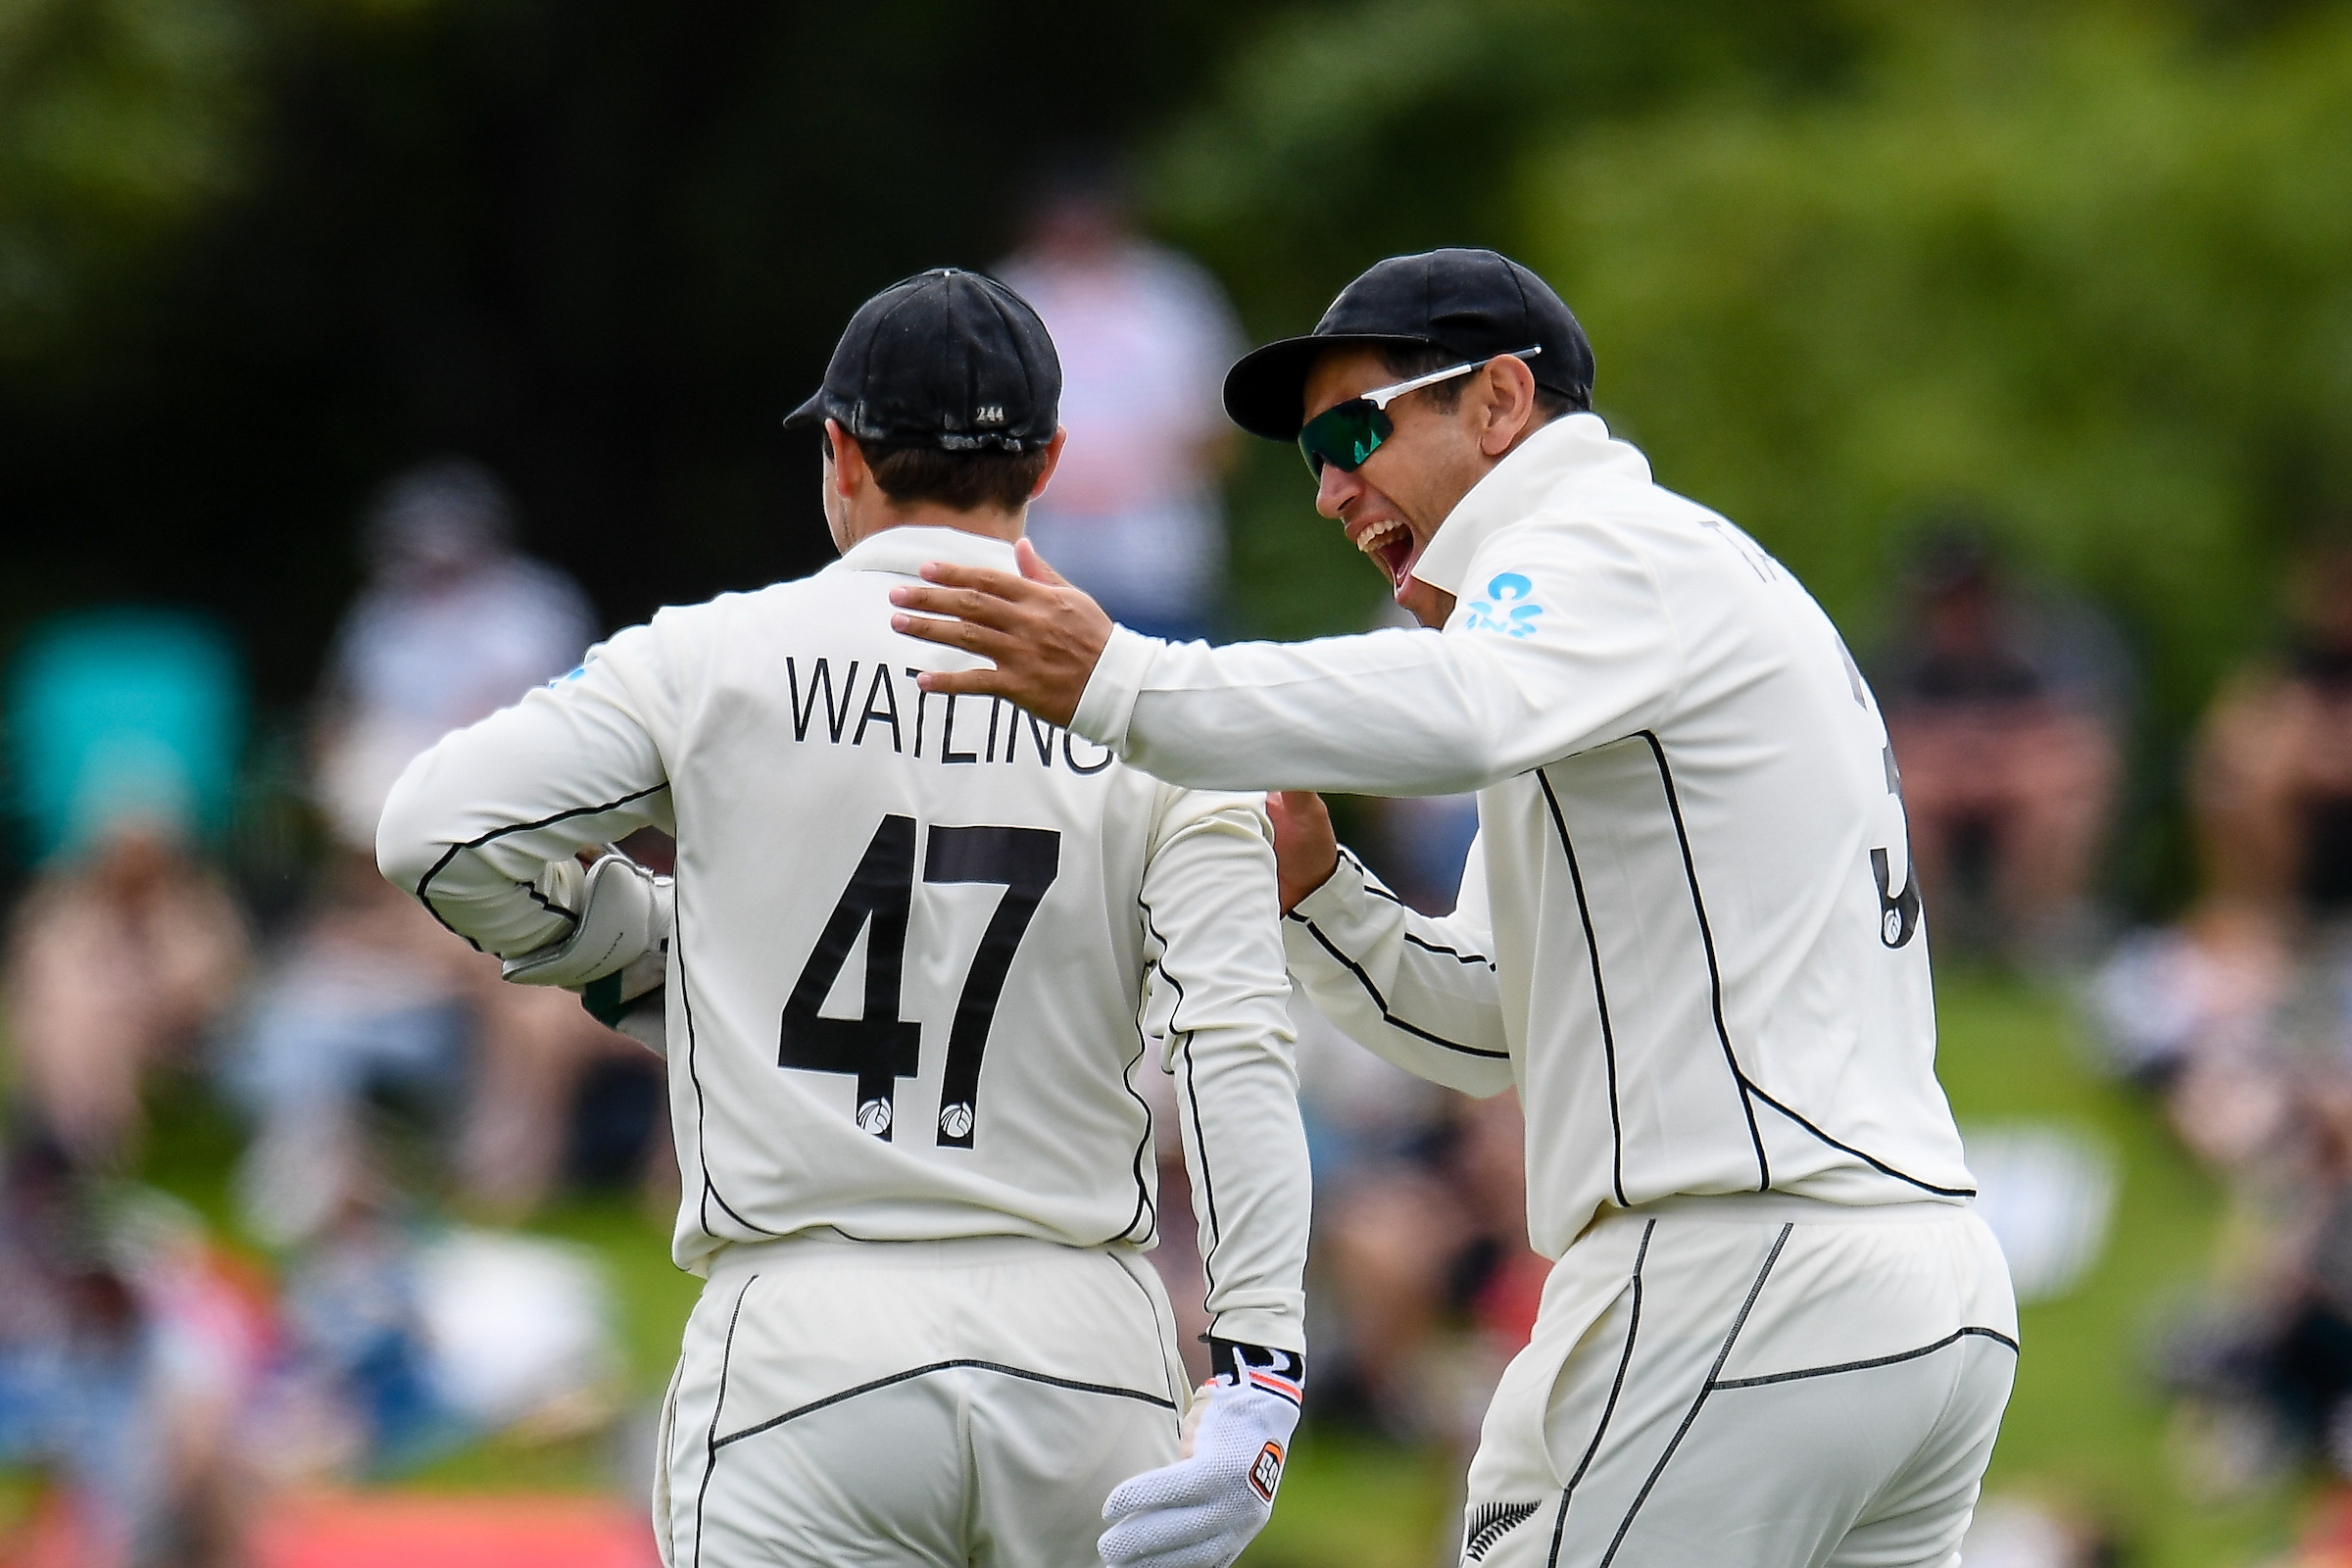 Taylor headlines NZ XI to face Netherlands in Napier | BJ Watling on coaching staff